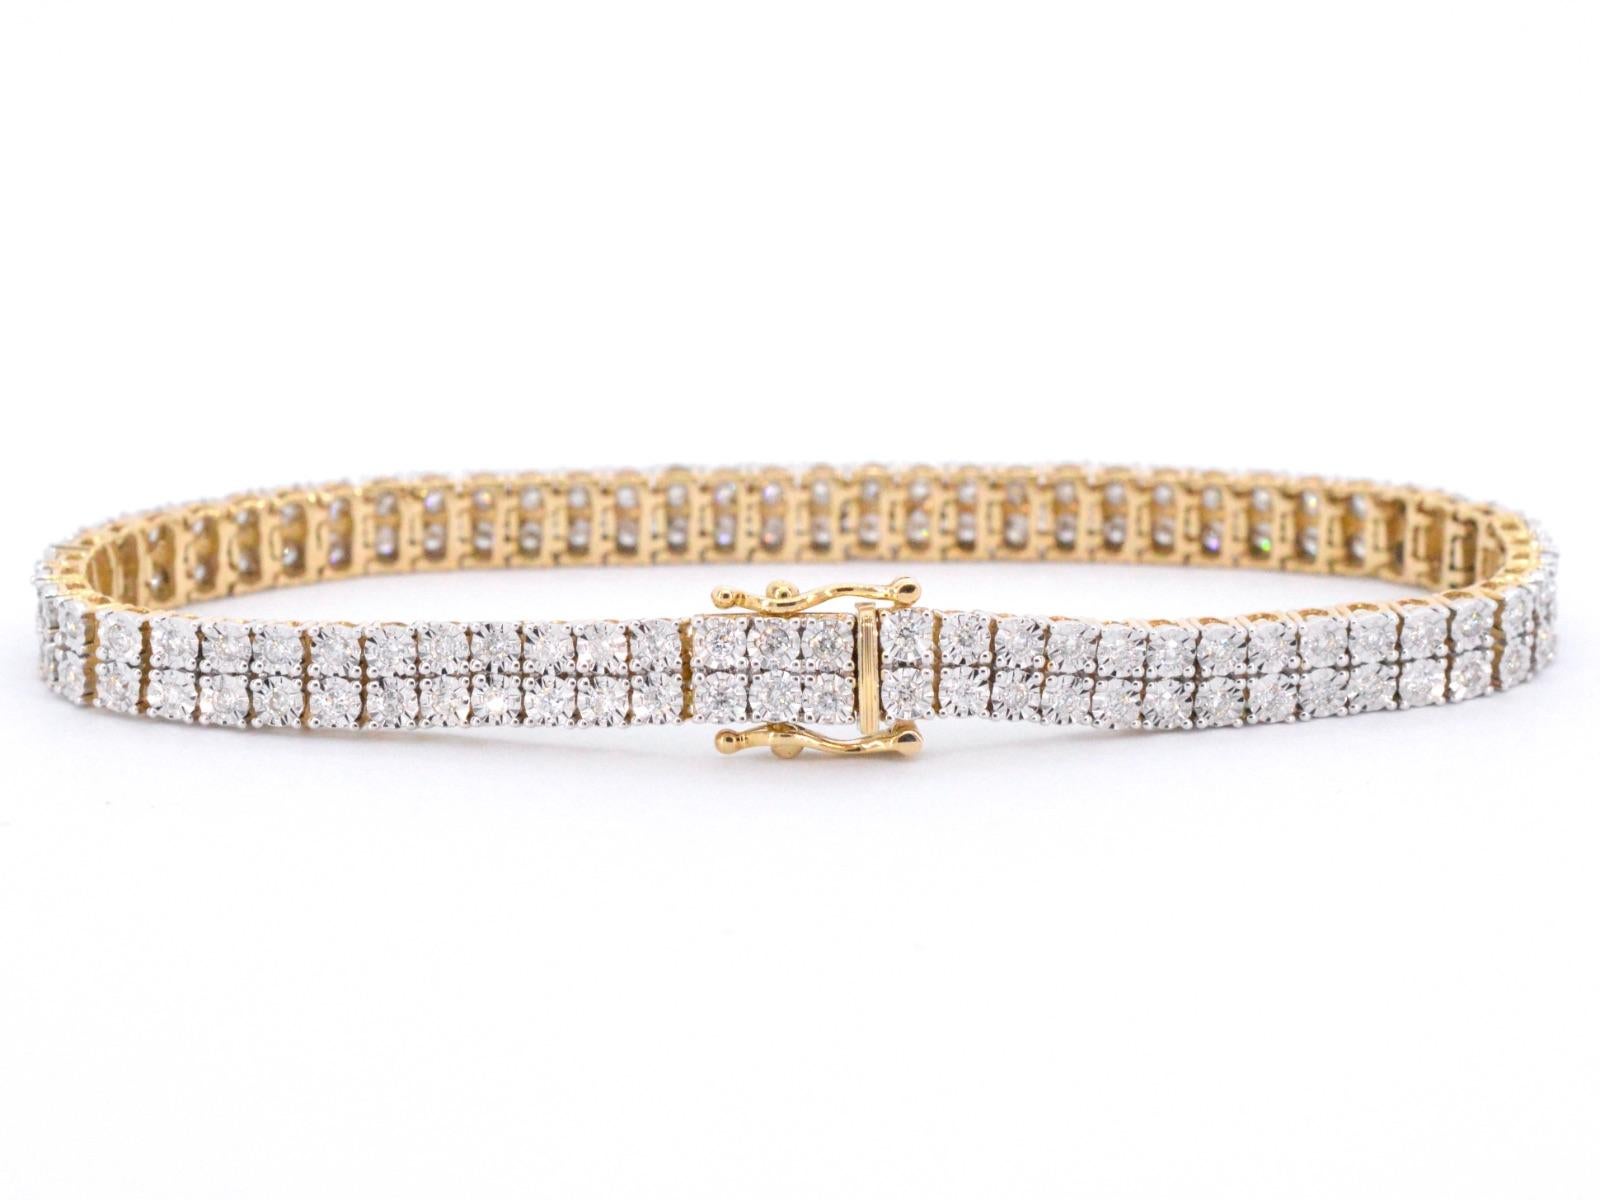 This bracelet is a beautiful and elegant piece of jewelry with a weight of 14.71 grams and a length of 18 cm. It is stamped with a 14 karat 585 hallmark, indicating its high-quality gold content.

The diamonds on the bracelet are cut in a round